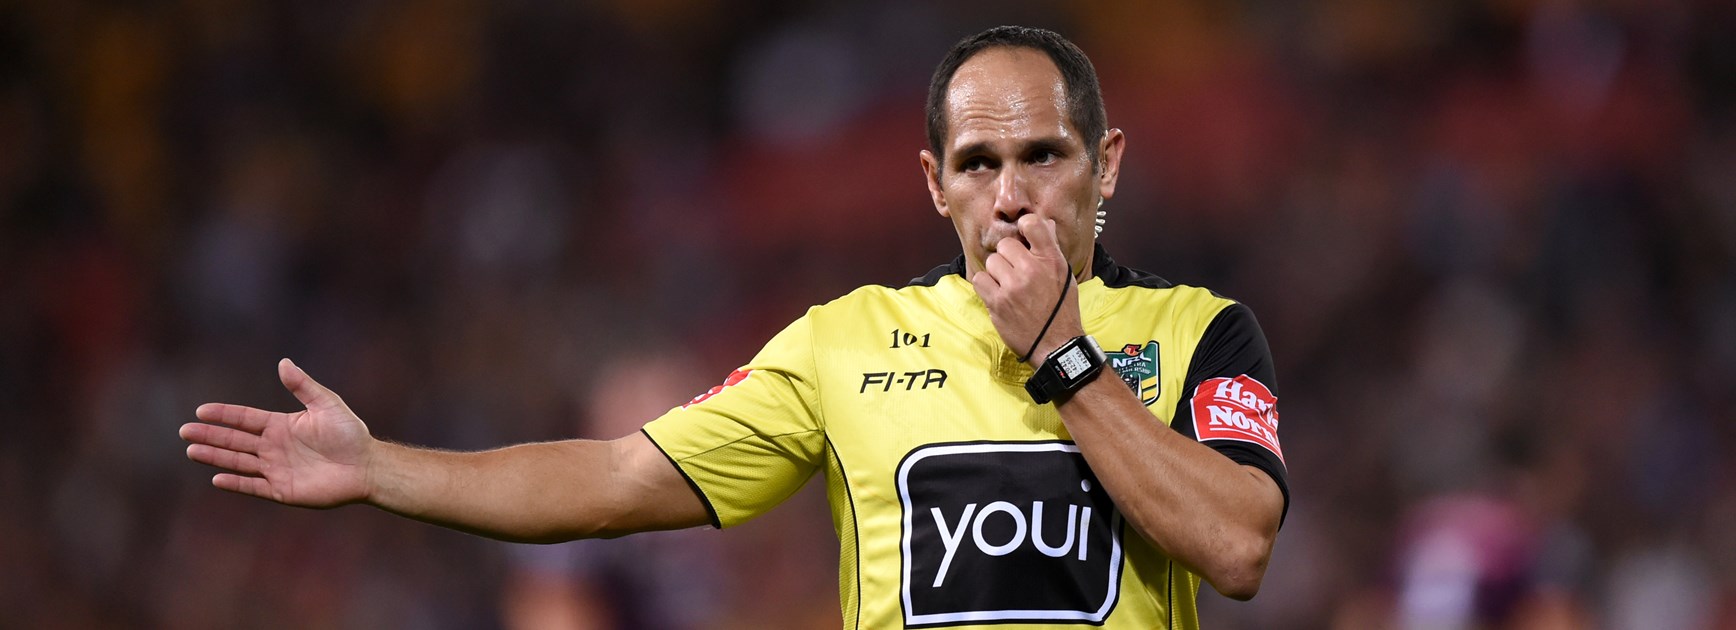 Top-flight referees set to earn more than 300k per year